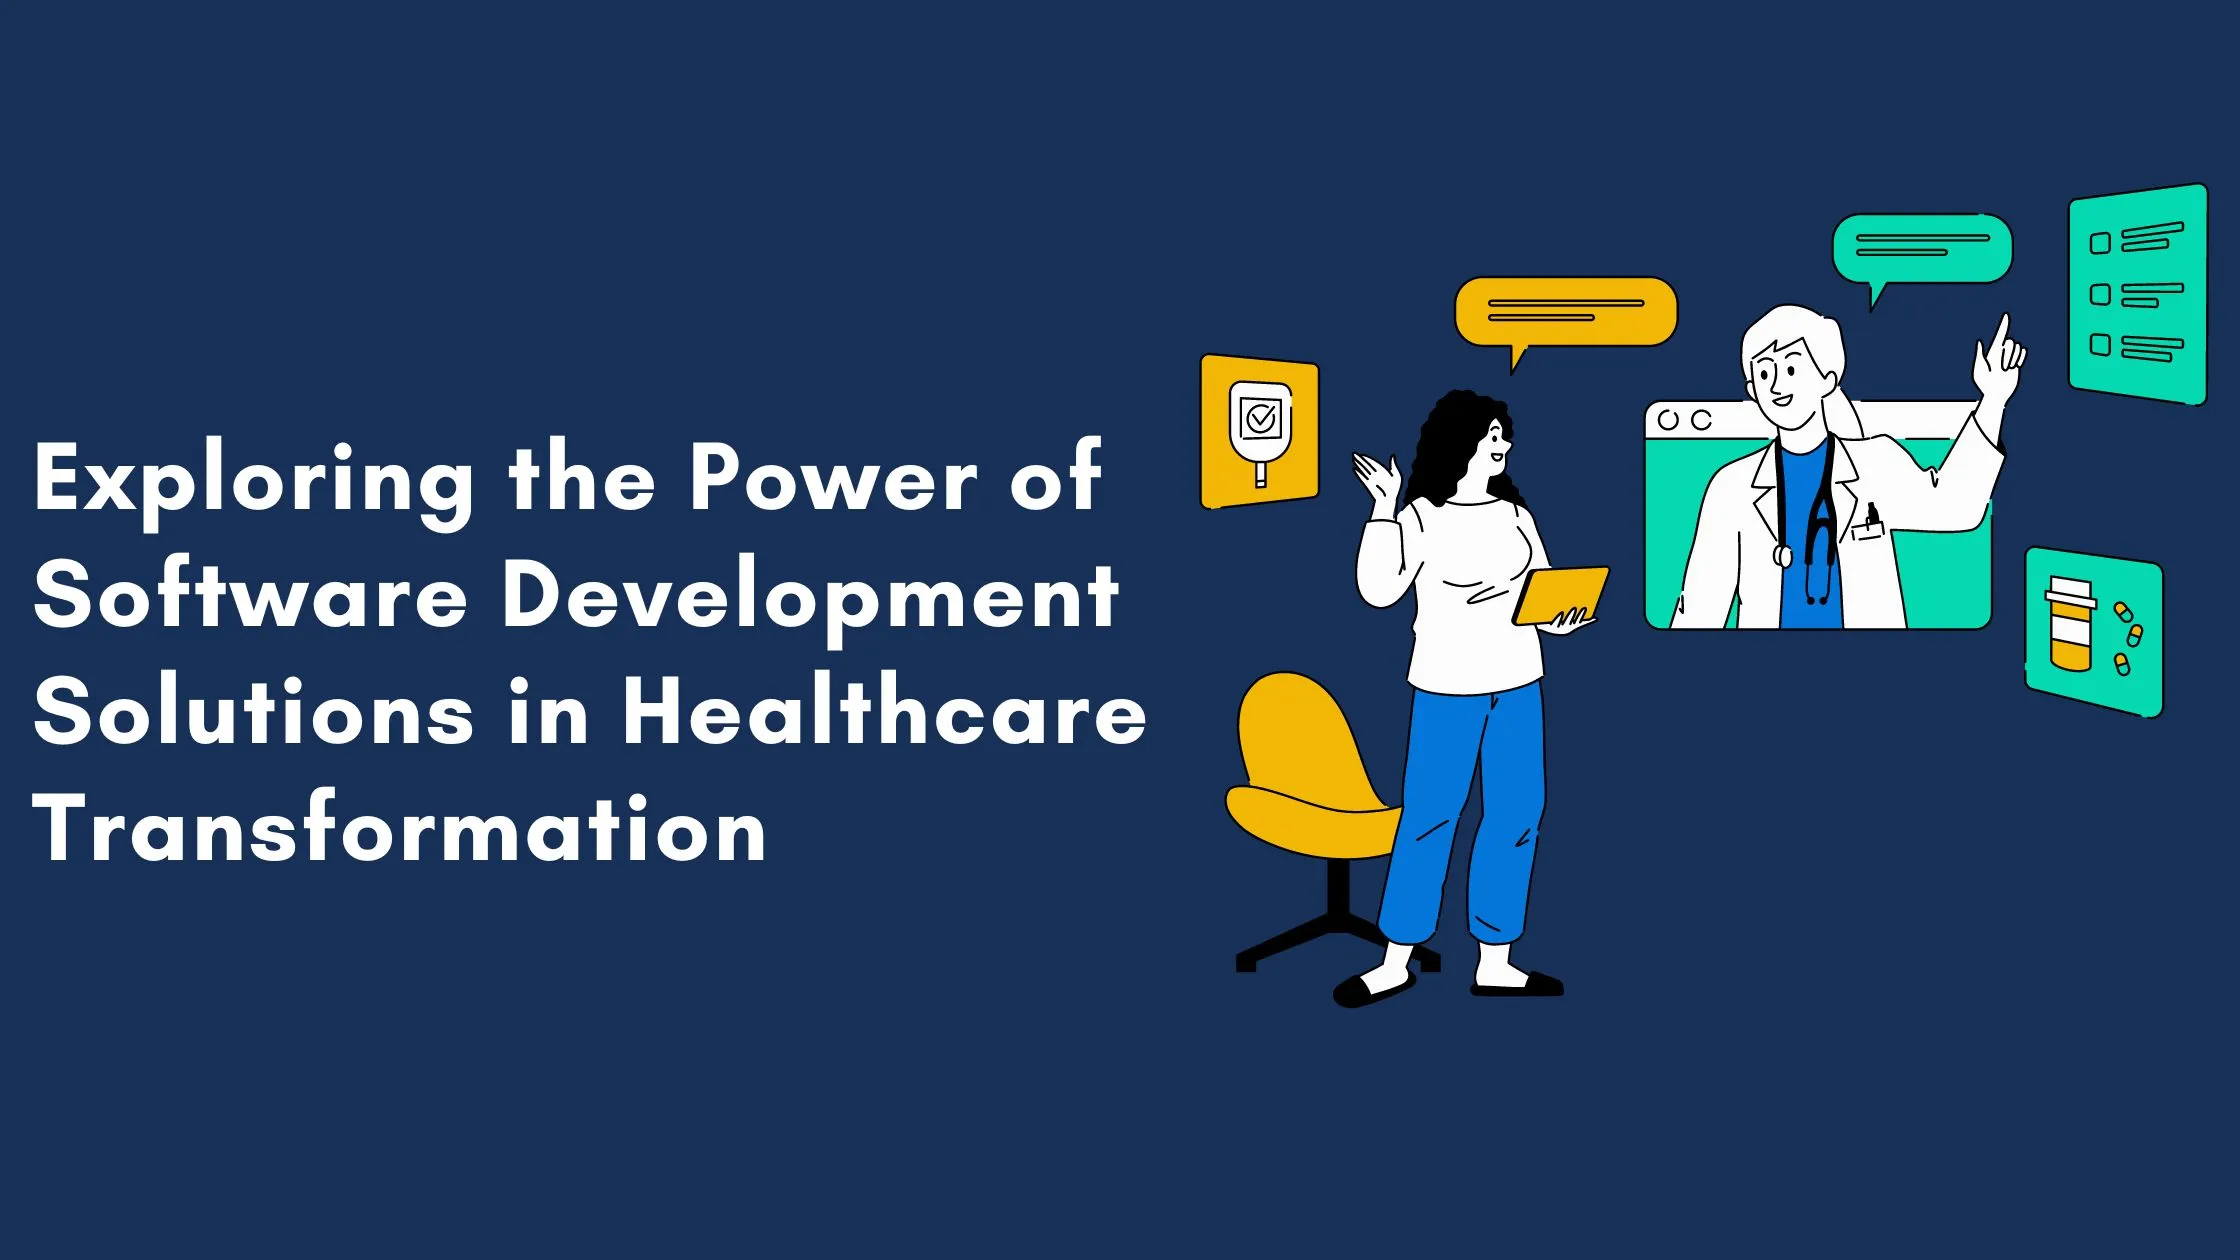 Transforming Healthcare: Harnessing the Power of Software Development Solutions